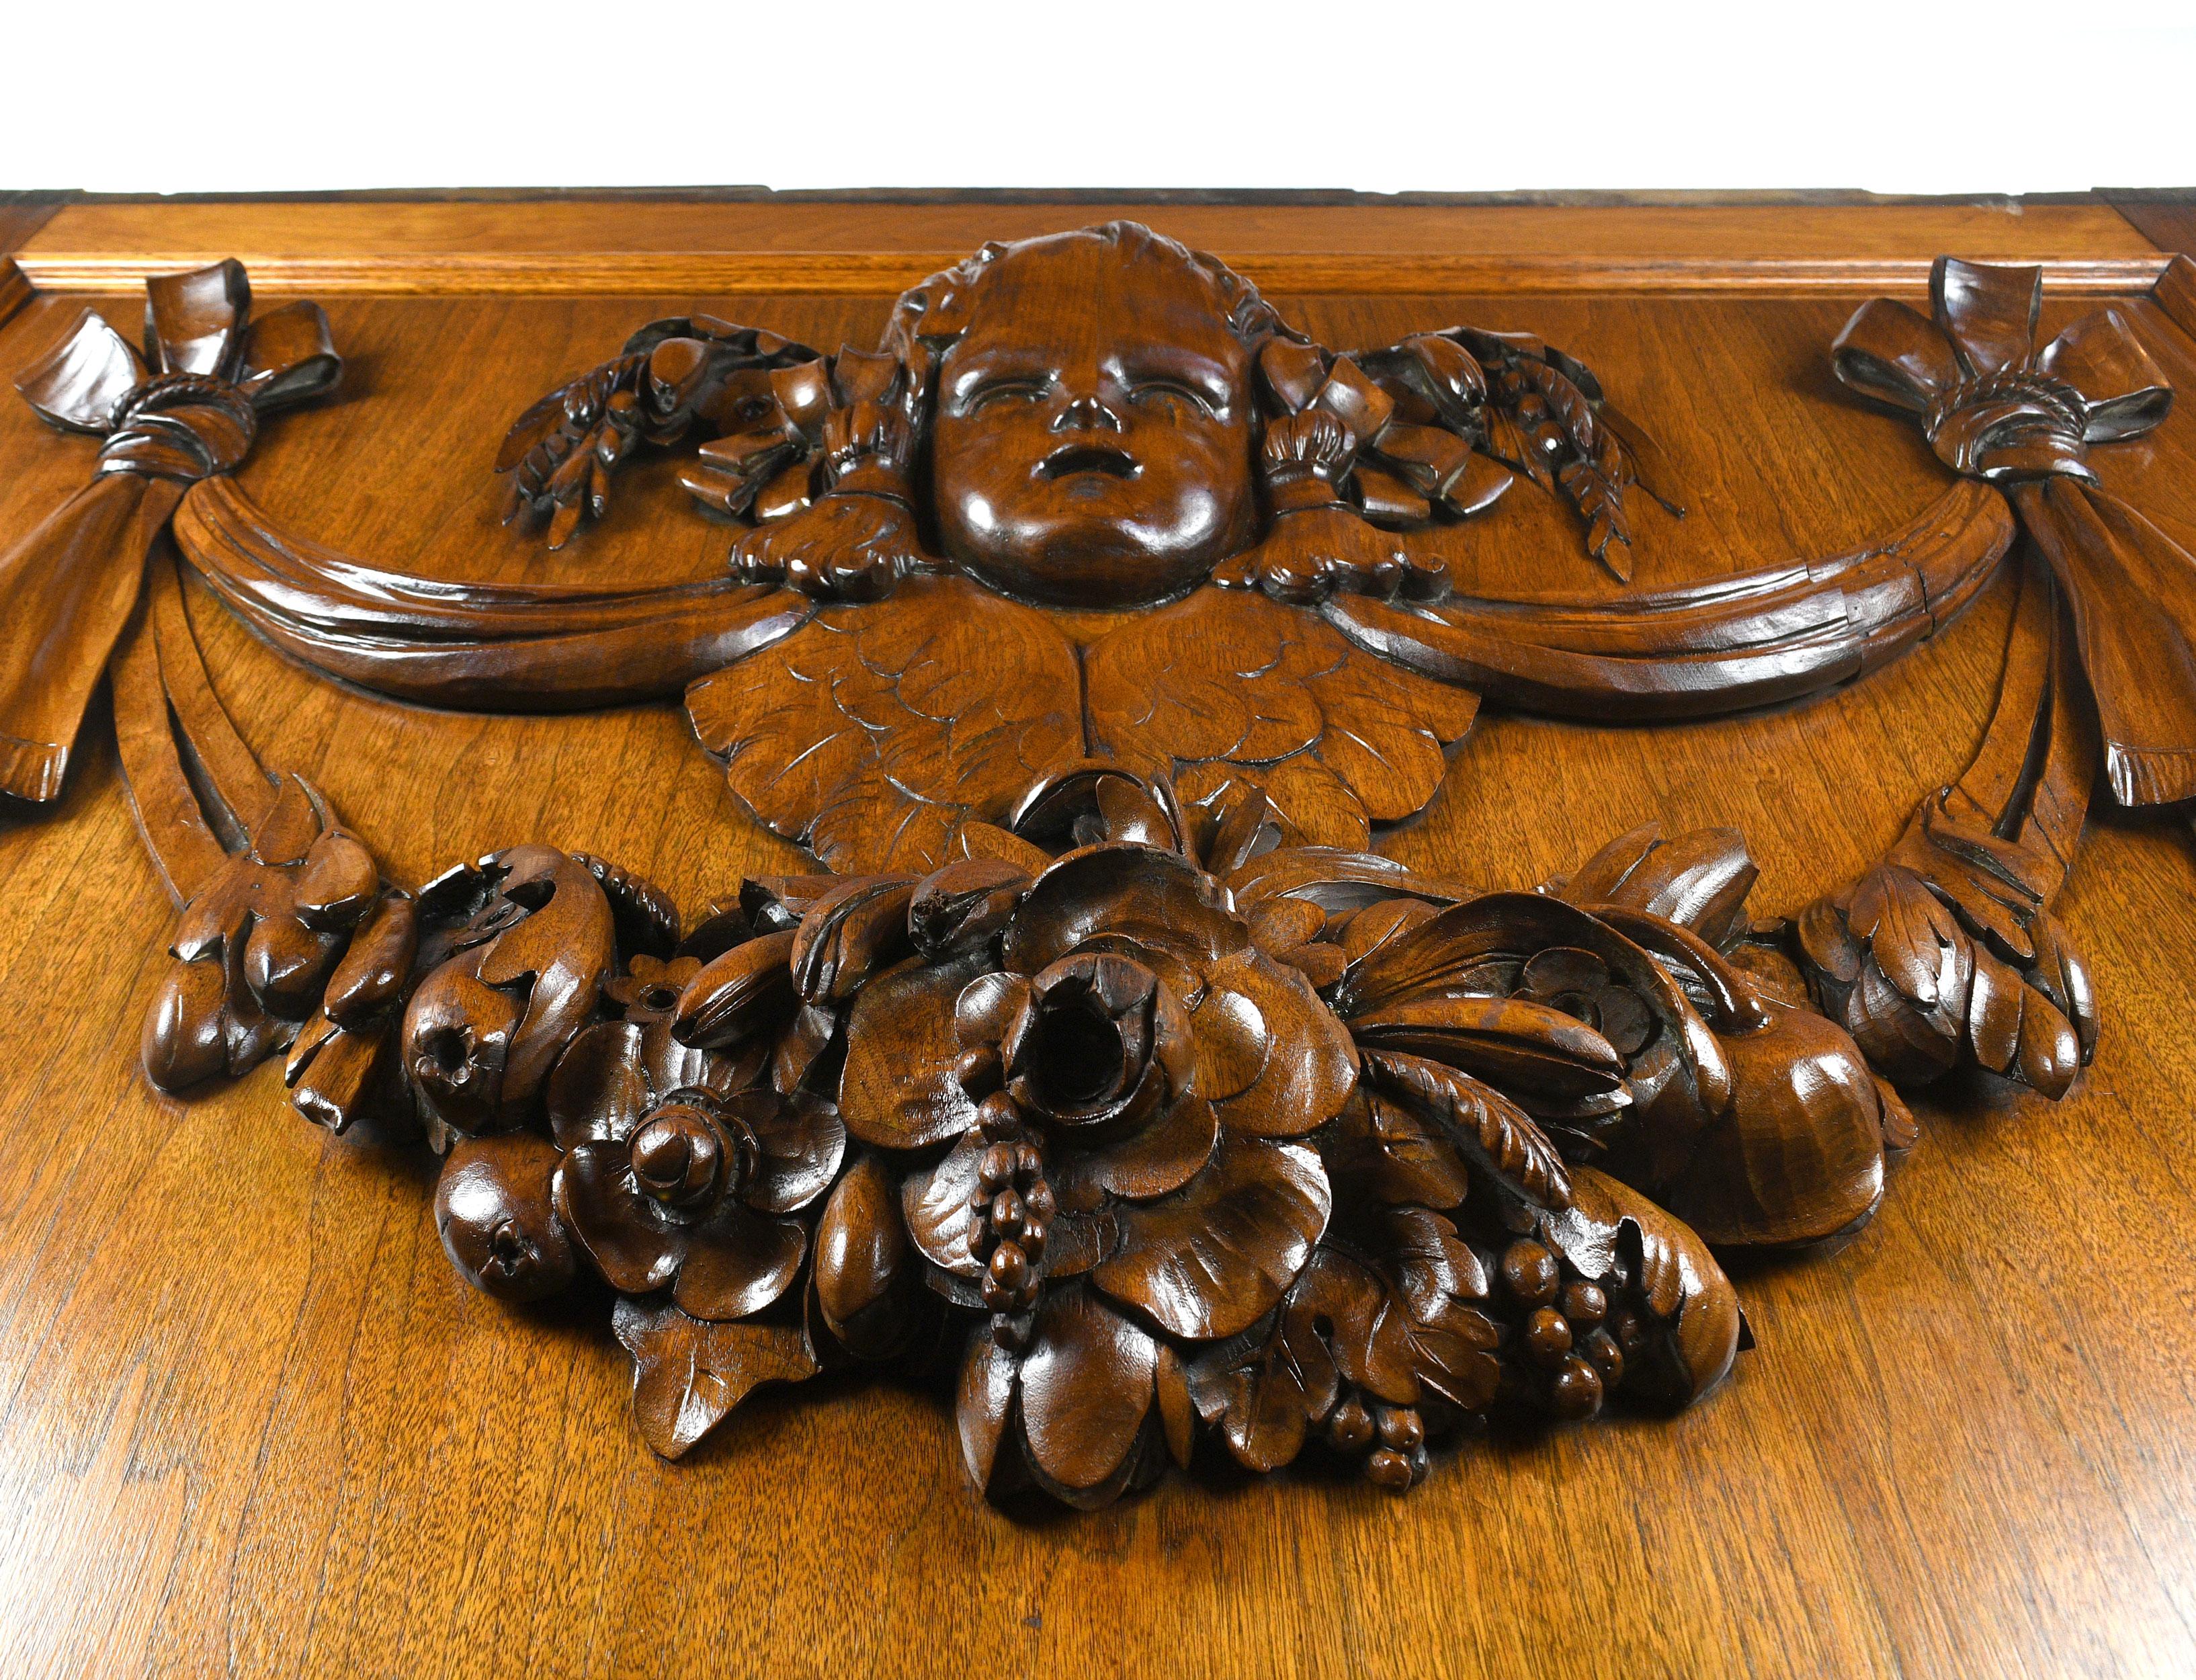 Salvaged from the original public ledger building in Philadelphia and in storage for years, these gorgeous wood panels are seeing light of day once again. This pair of hand carved wood panels is made of handsome walnut and features an intricately